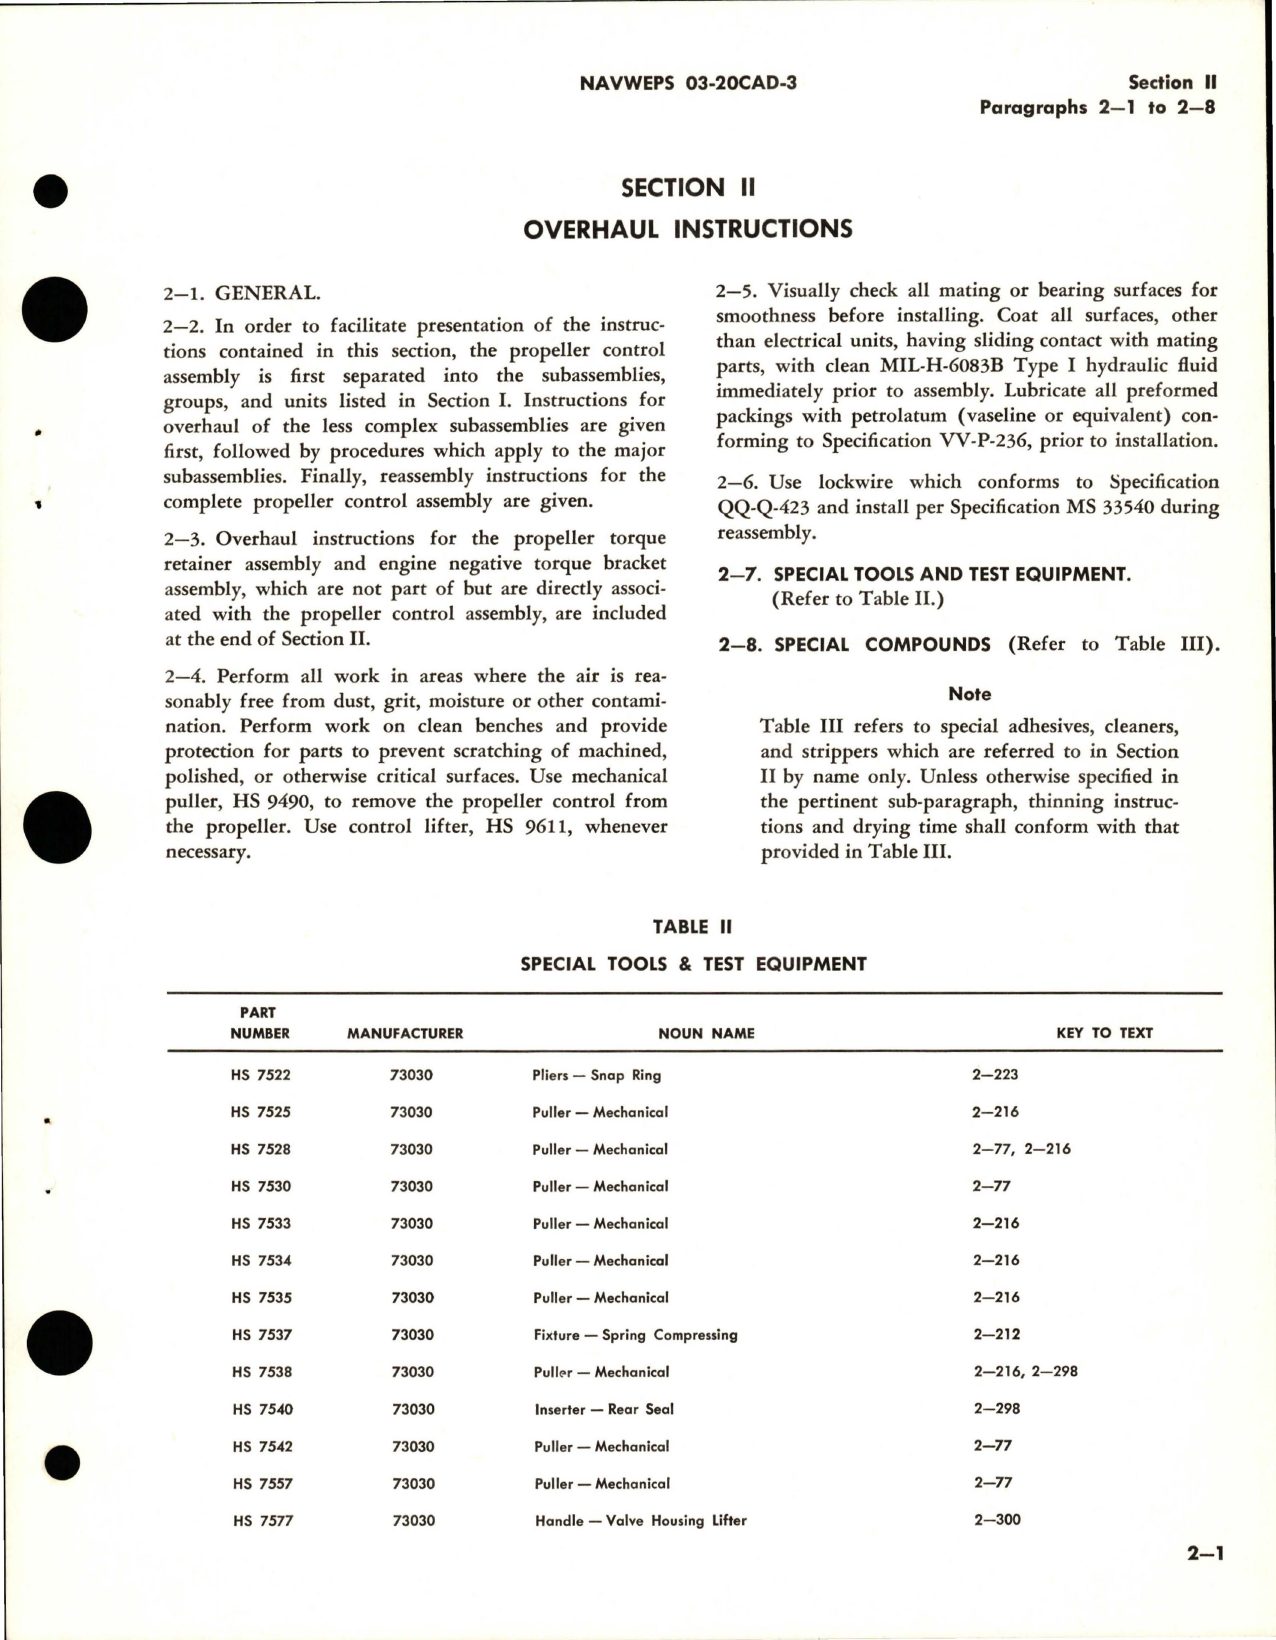 Sample page 7 from AirCorps Library document: Overhaul Instructions for Variable Pitch Aircraft Propeller Control - Assembly No. 582440 